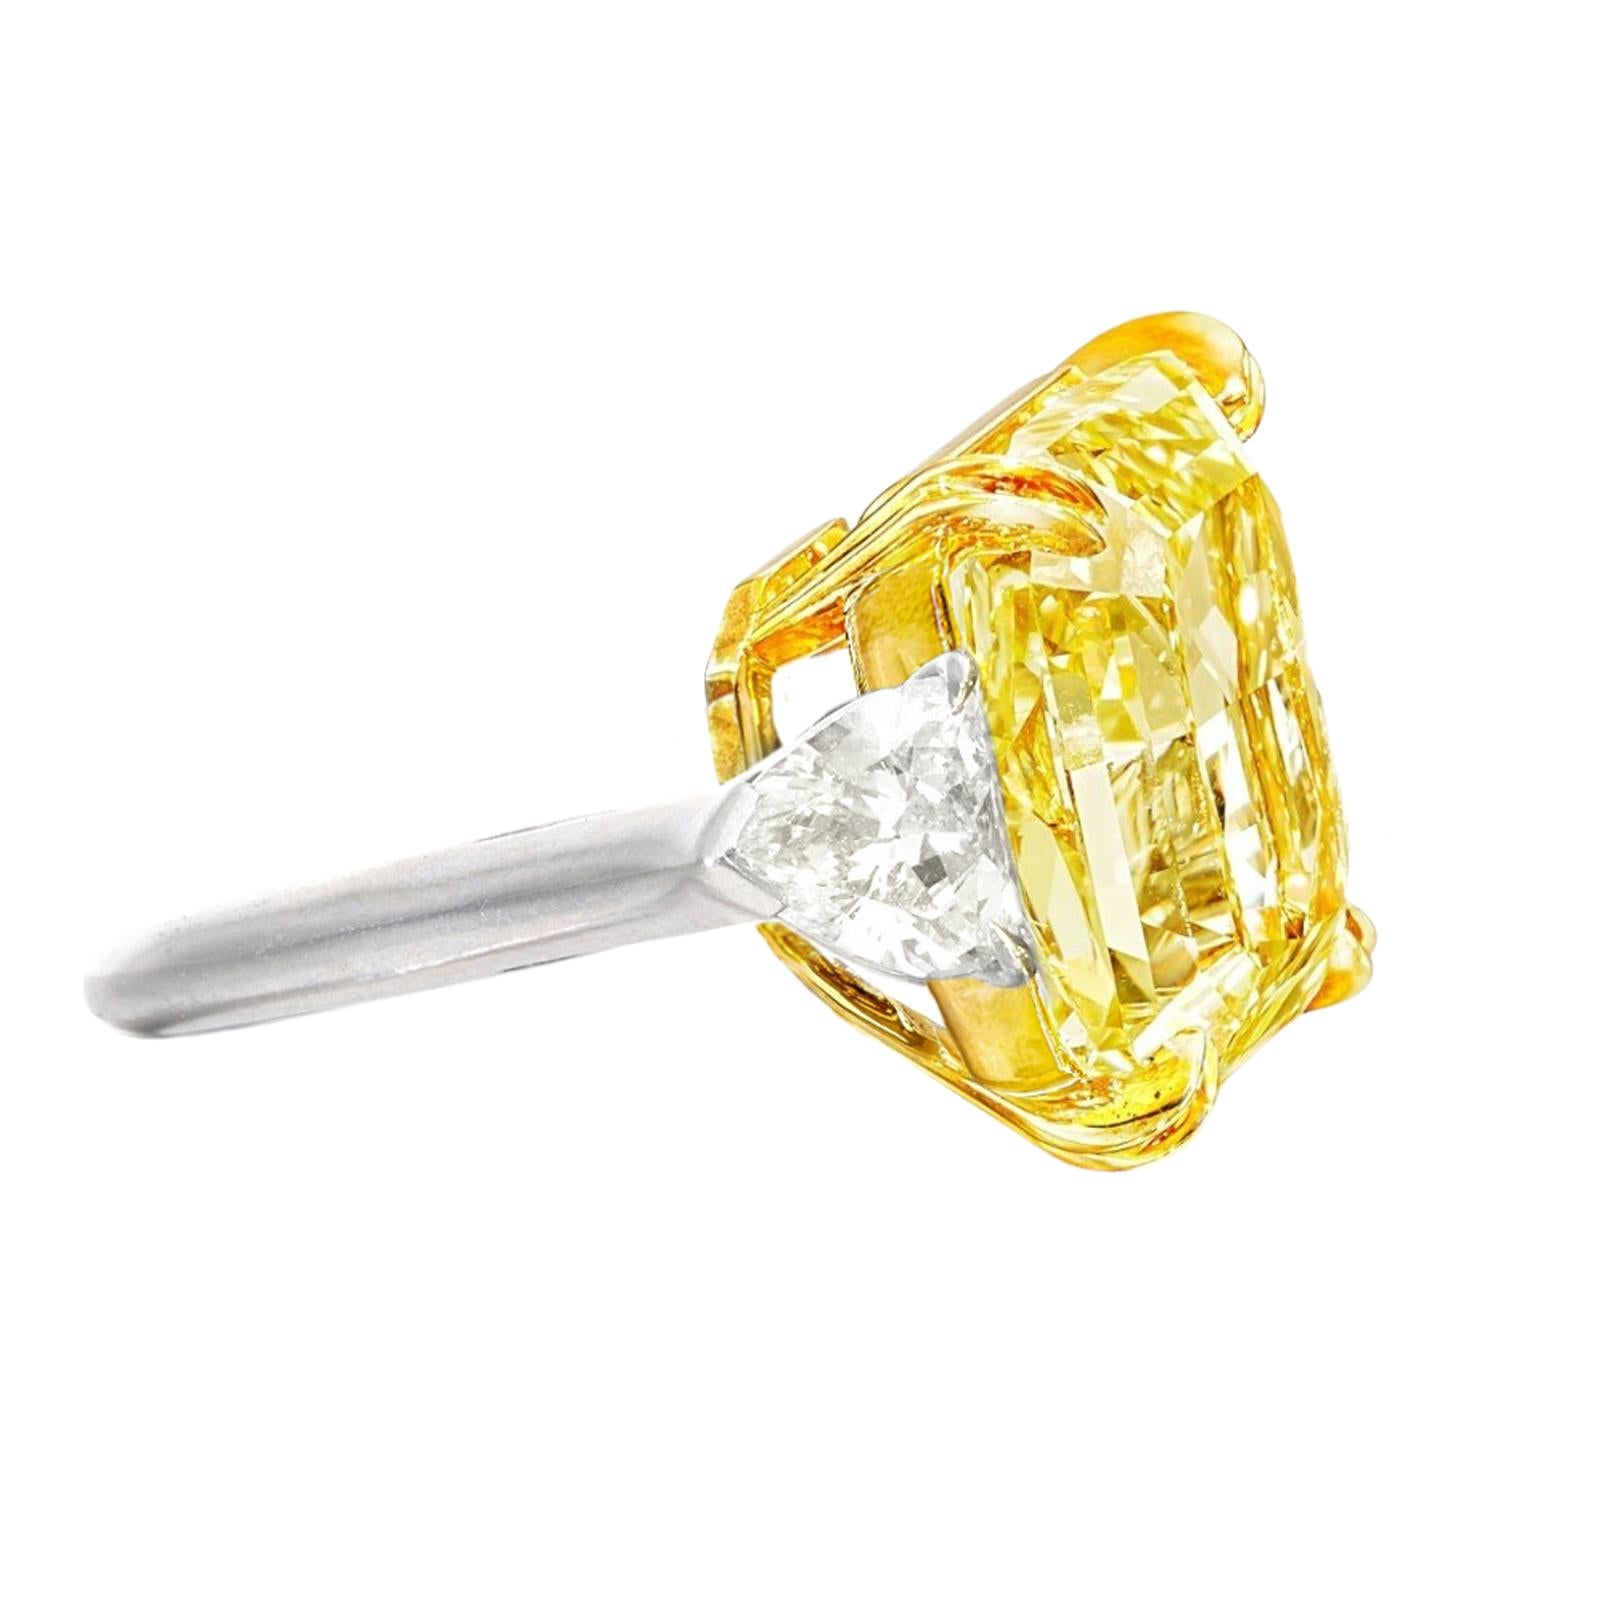 Contemporary GIA Certified 12 Ct Fancy Yellow Diamond Ring with Trillion For Sale